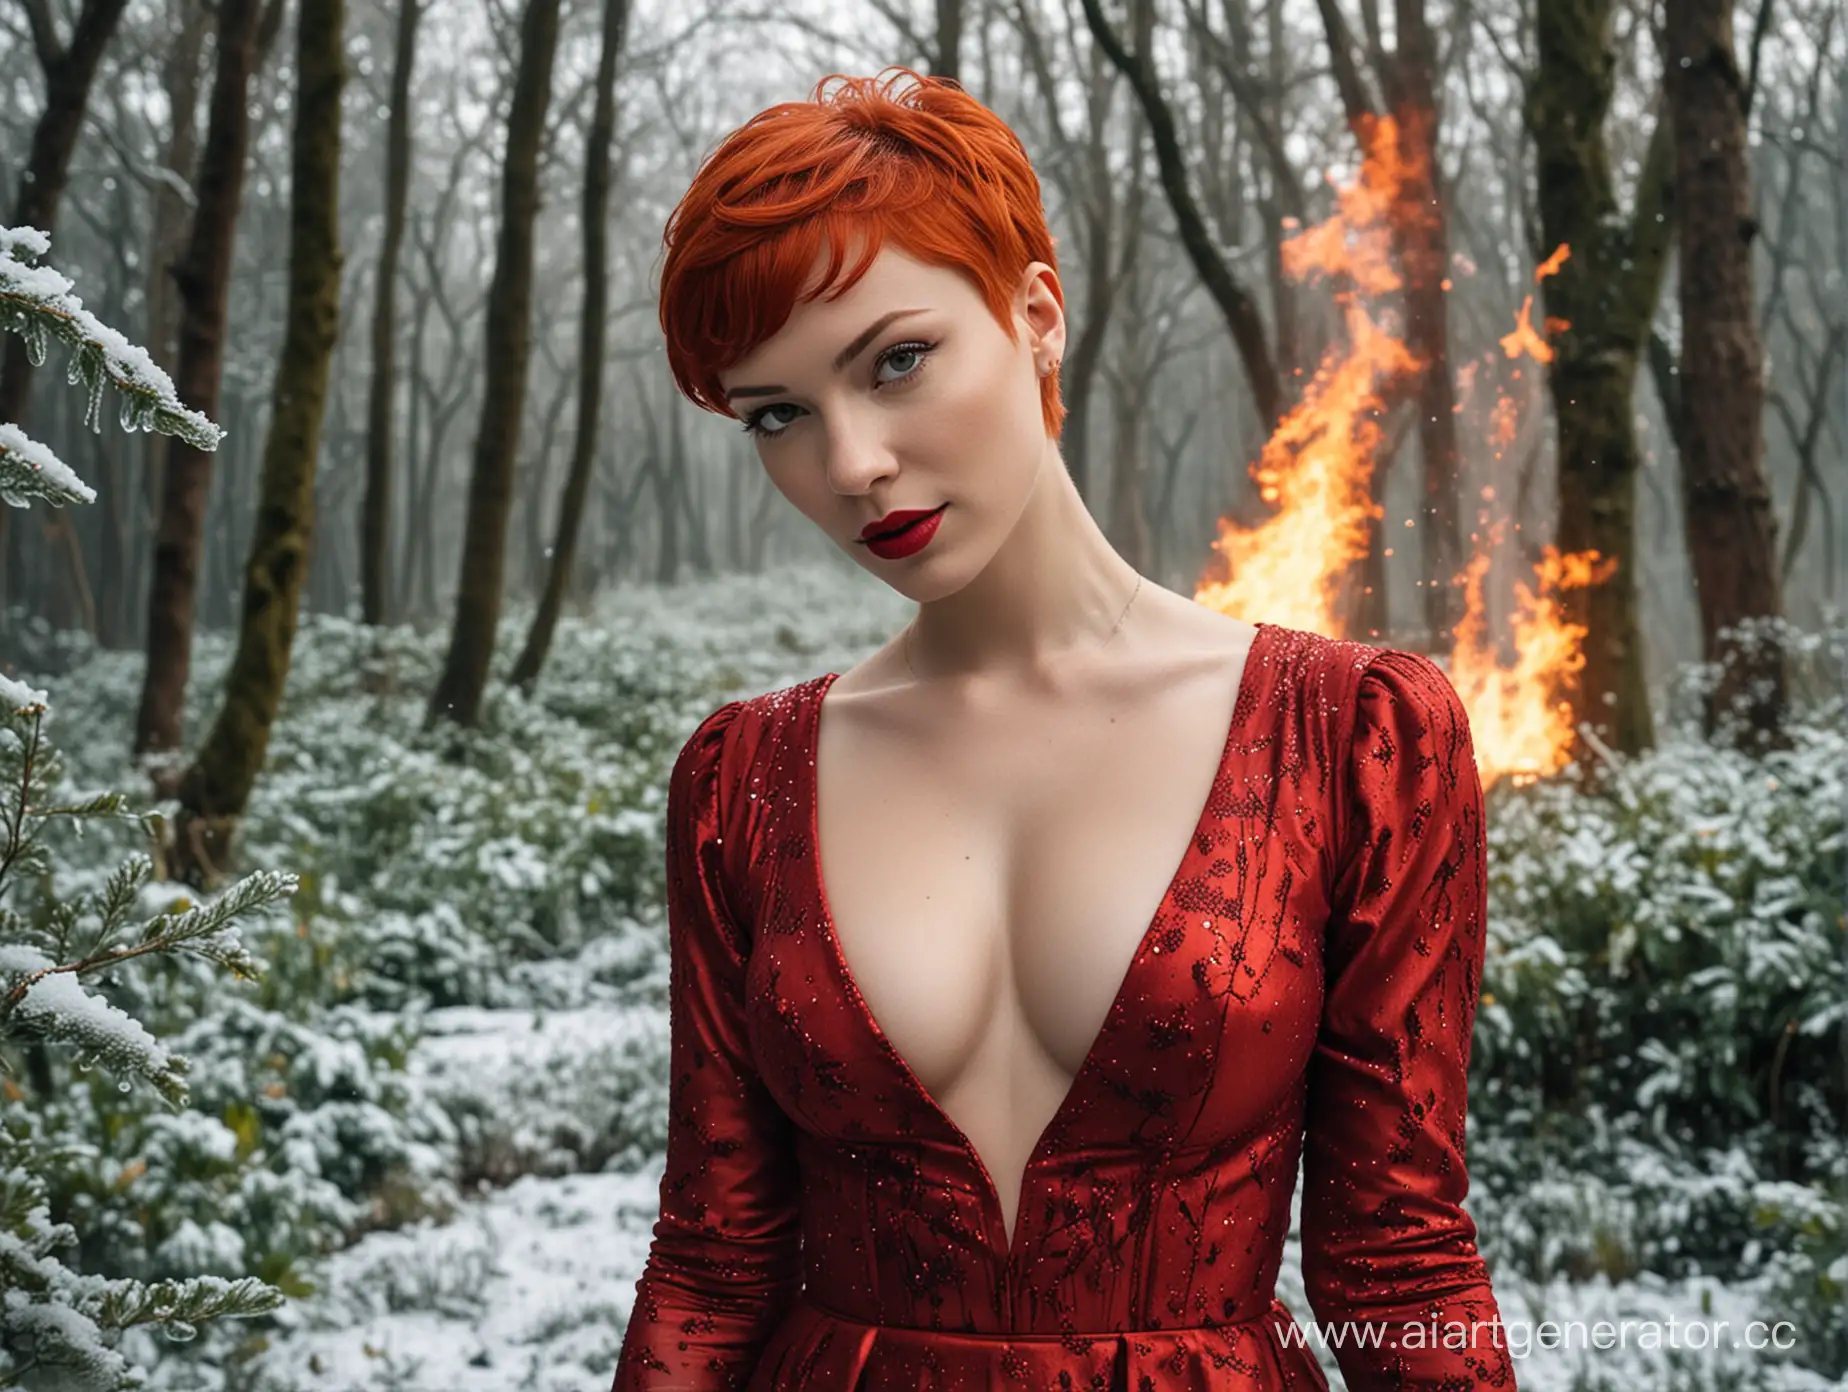 Fieryhaired-Pixie-Girl-in-TudorStyle-Red-Dress-Amid-Ice-and-Flame